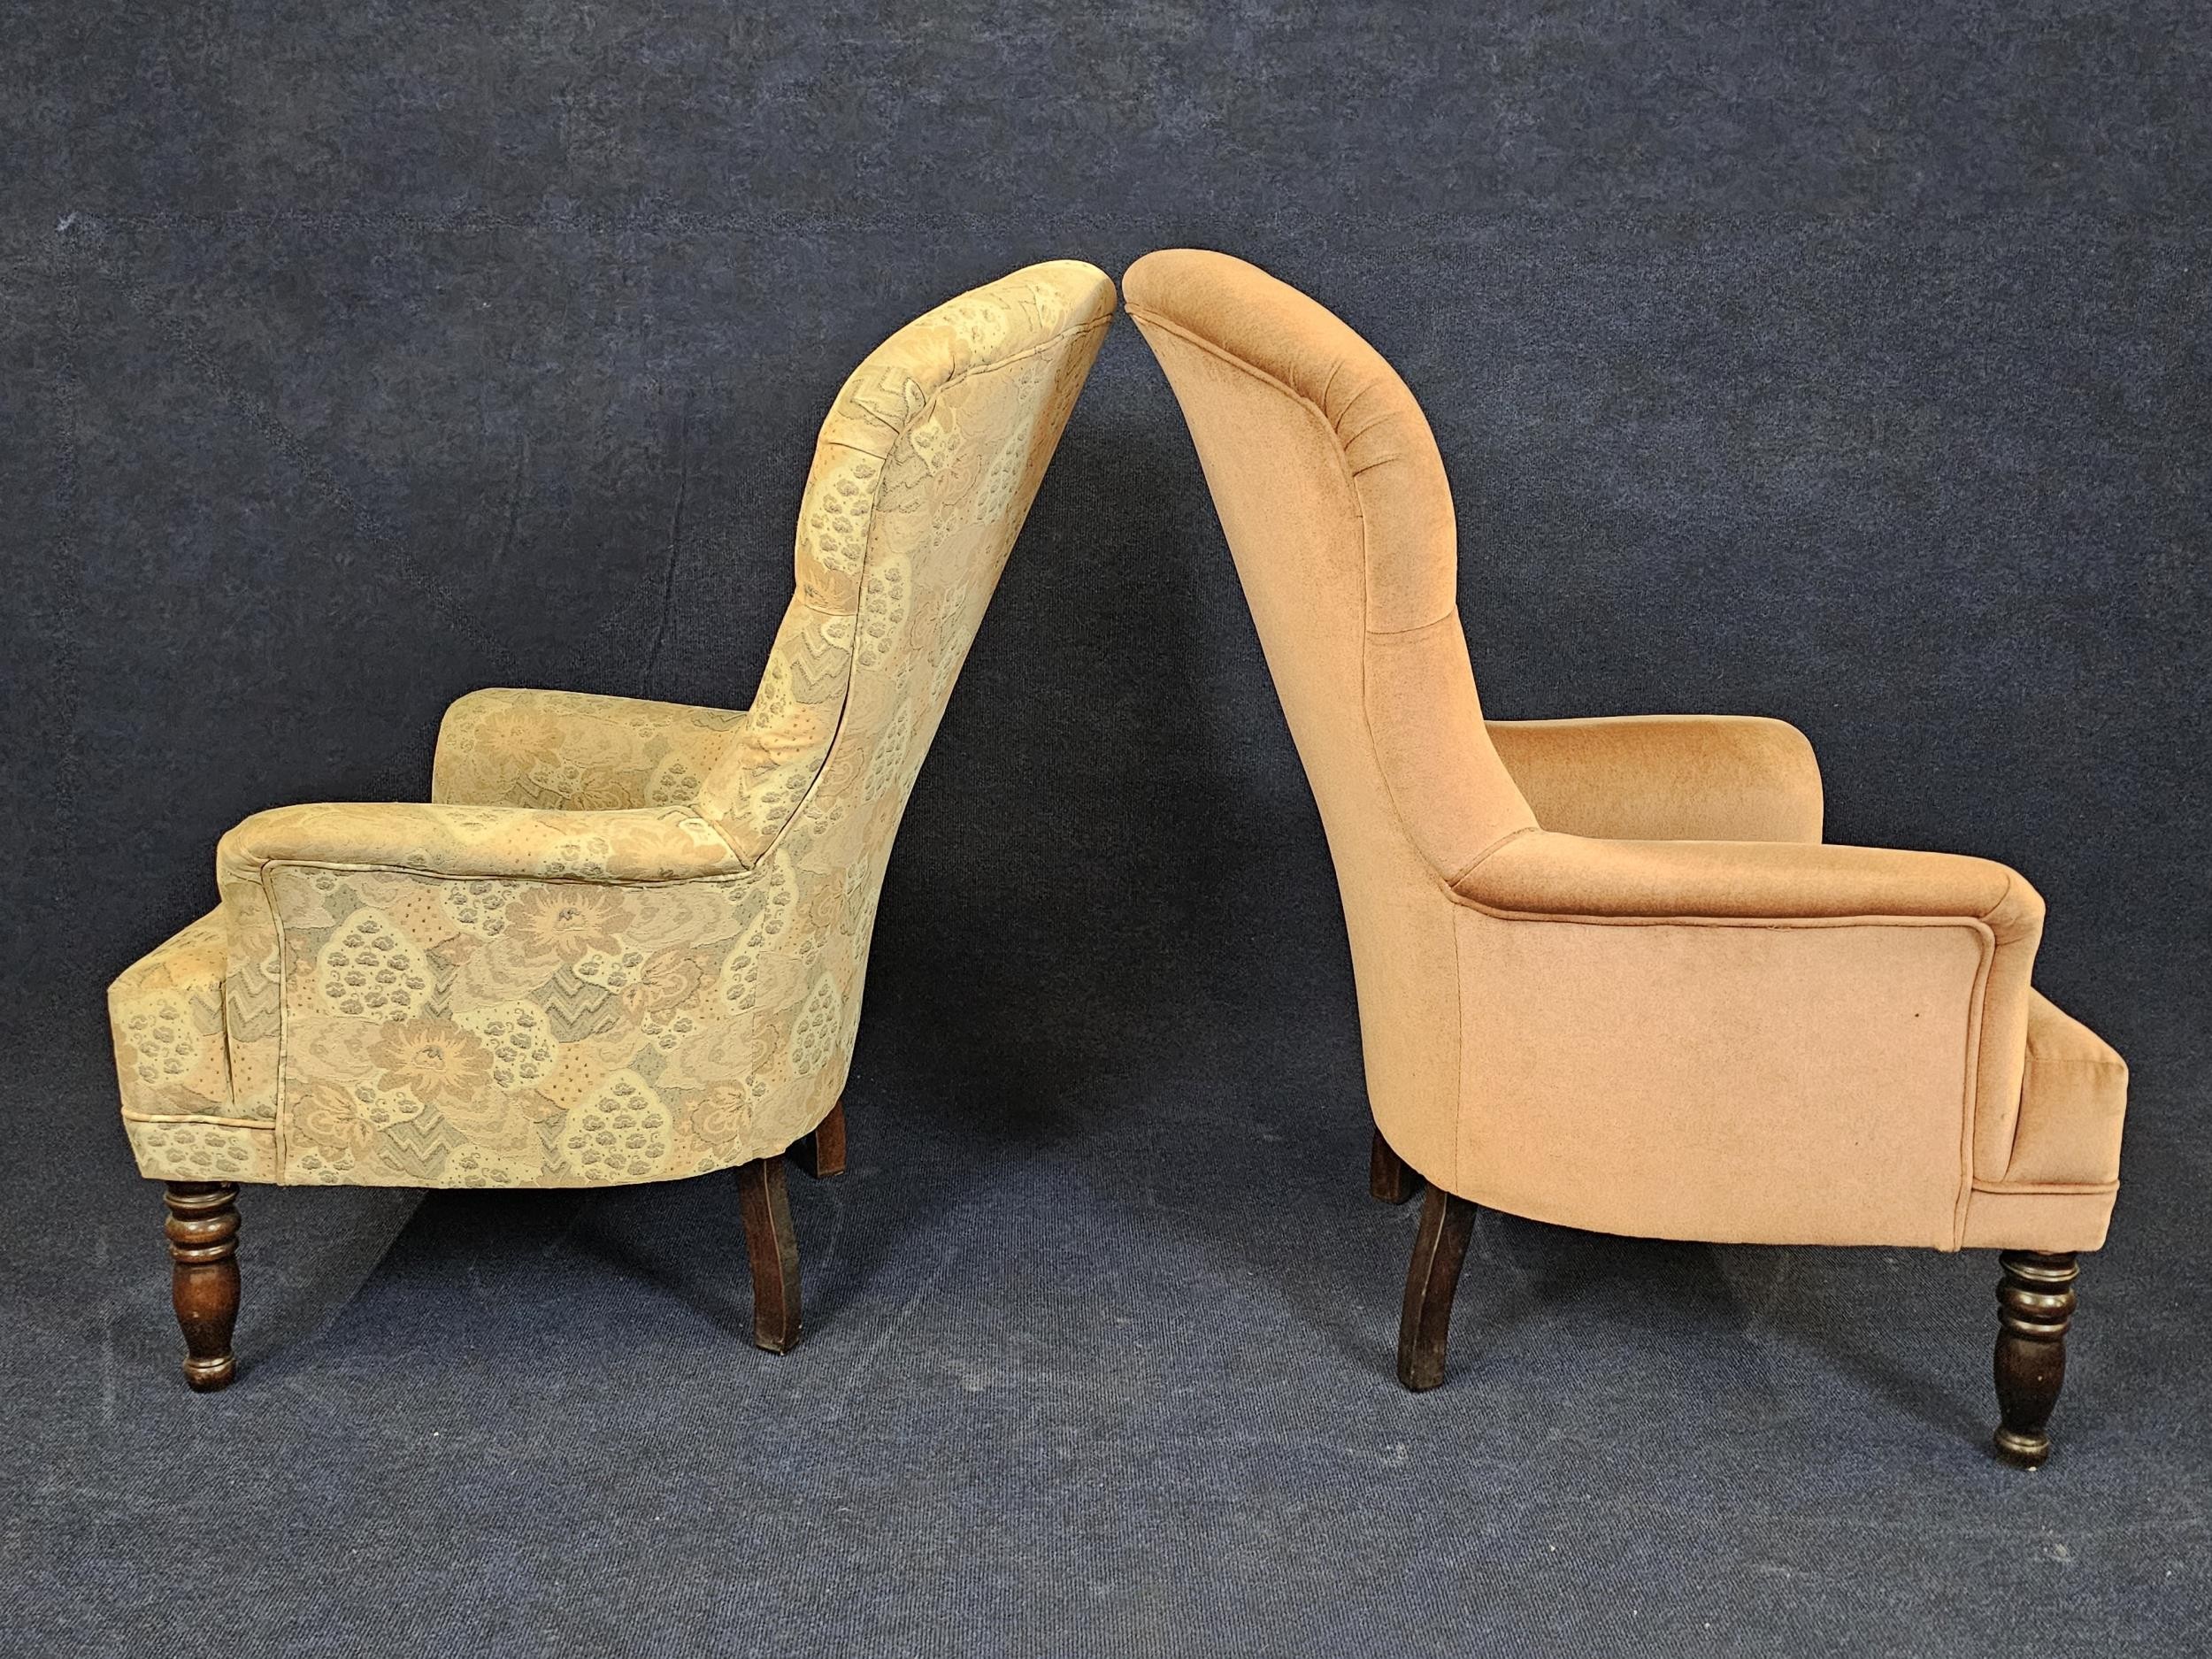 A pair of Victorian style armchairs in differing upholstery. - Image 3 of 3